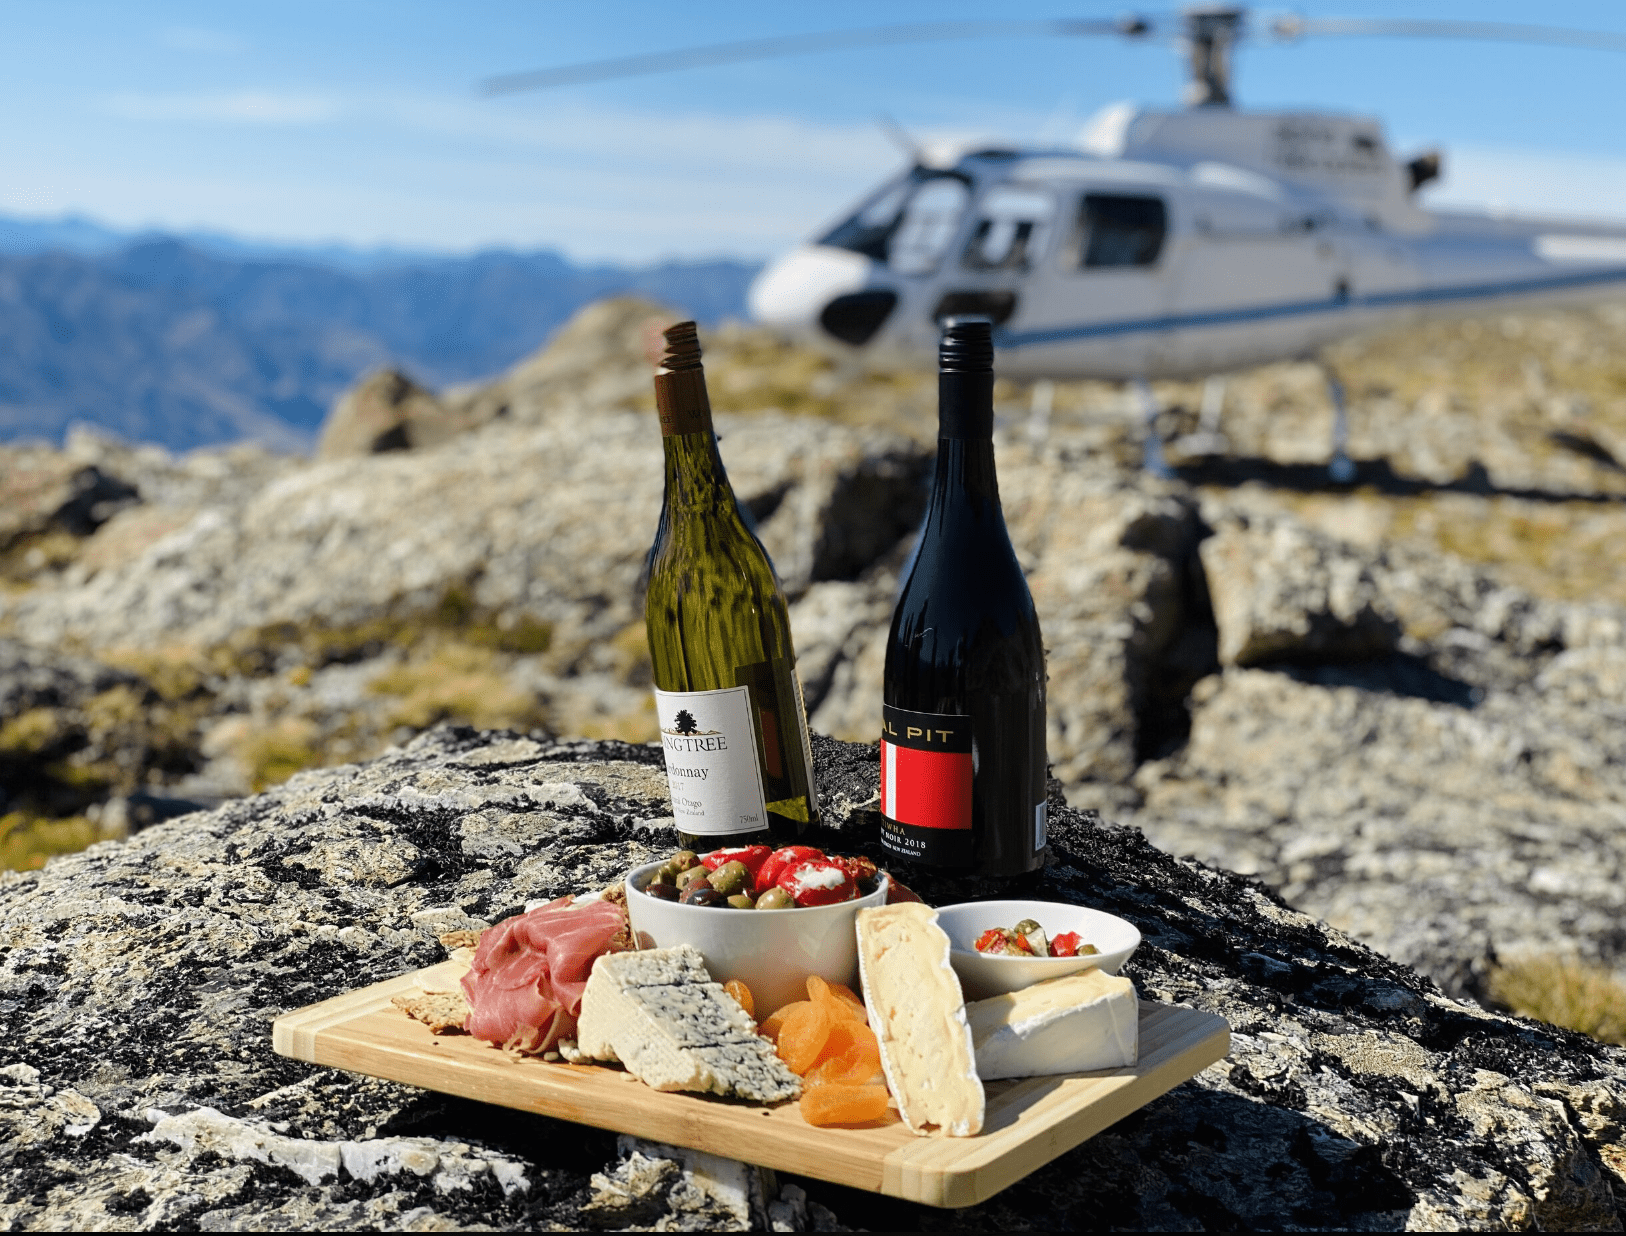 our team offers a first-class day trip experience of scenic helicopter touring with remote gourmet dining. 